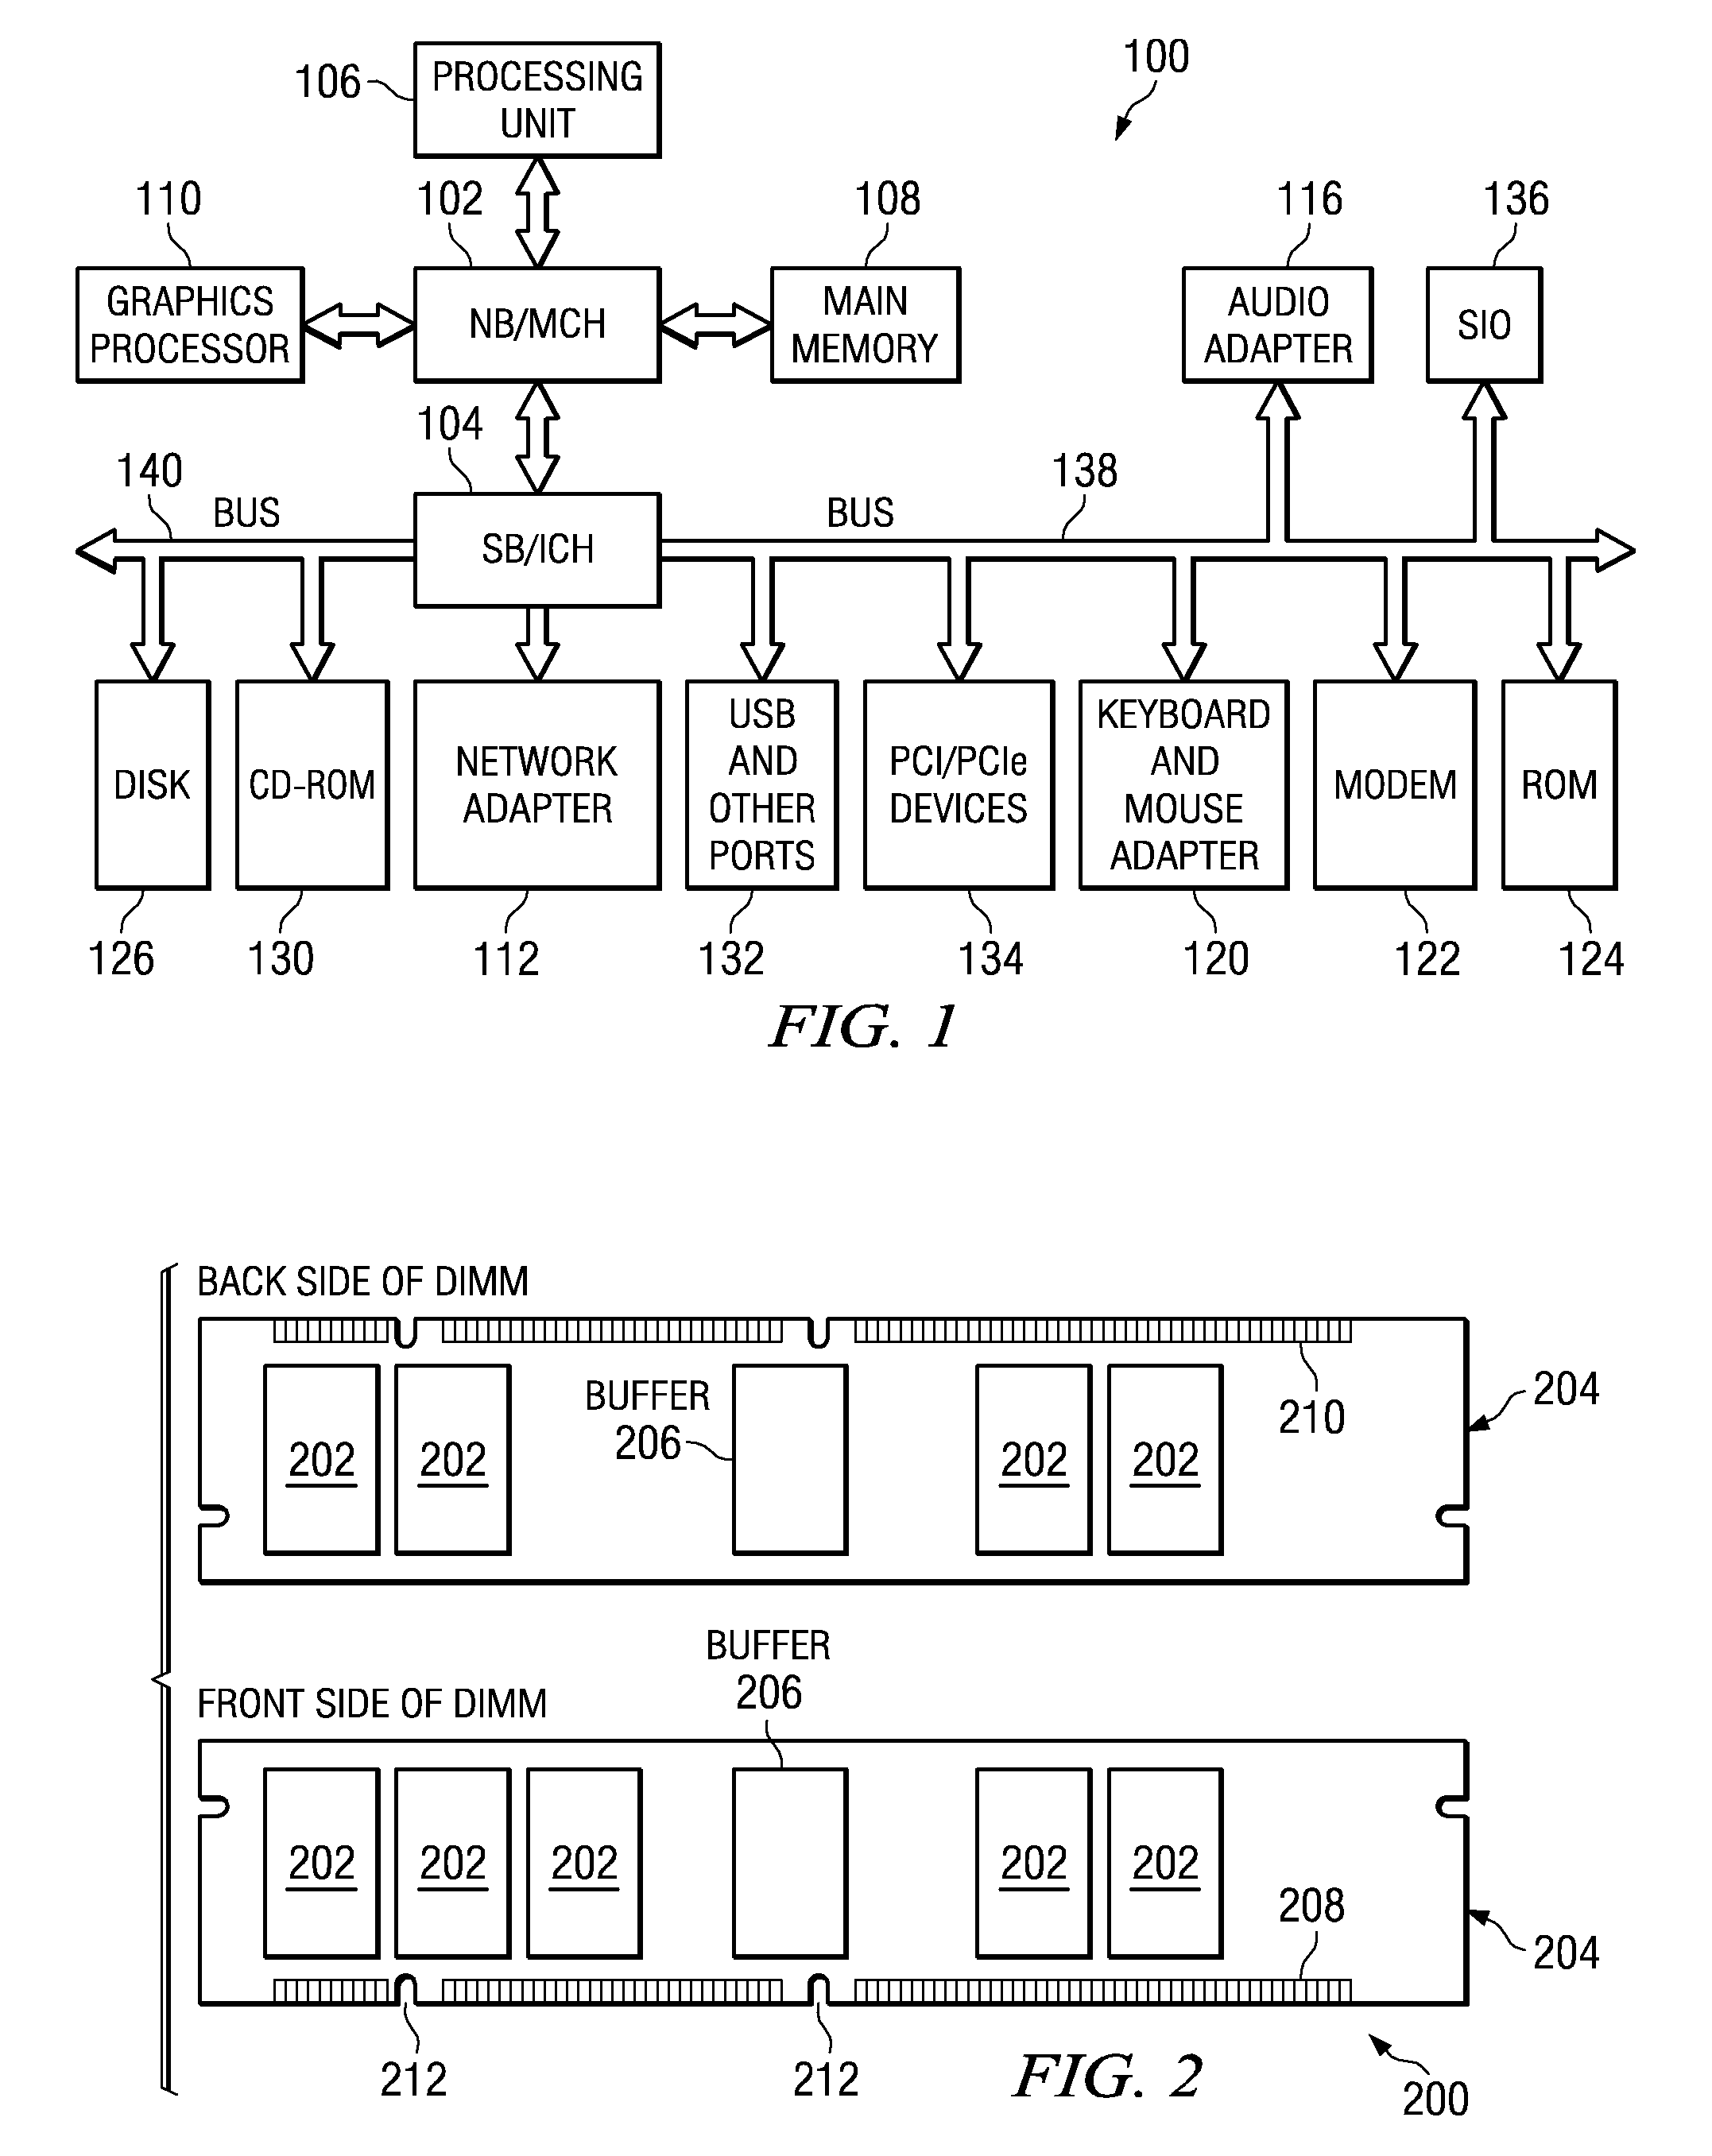 System for a Combined Error Correction Code and Cyclic Redundancy Check Code for a Memory Channel